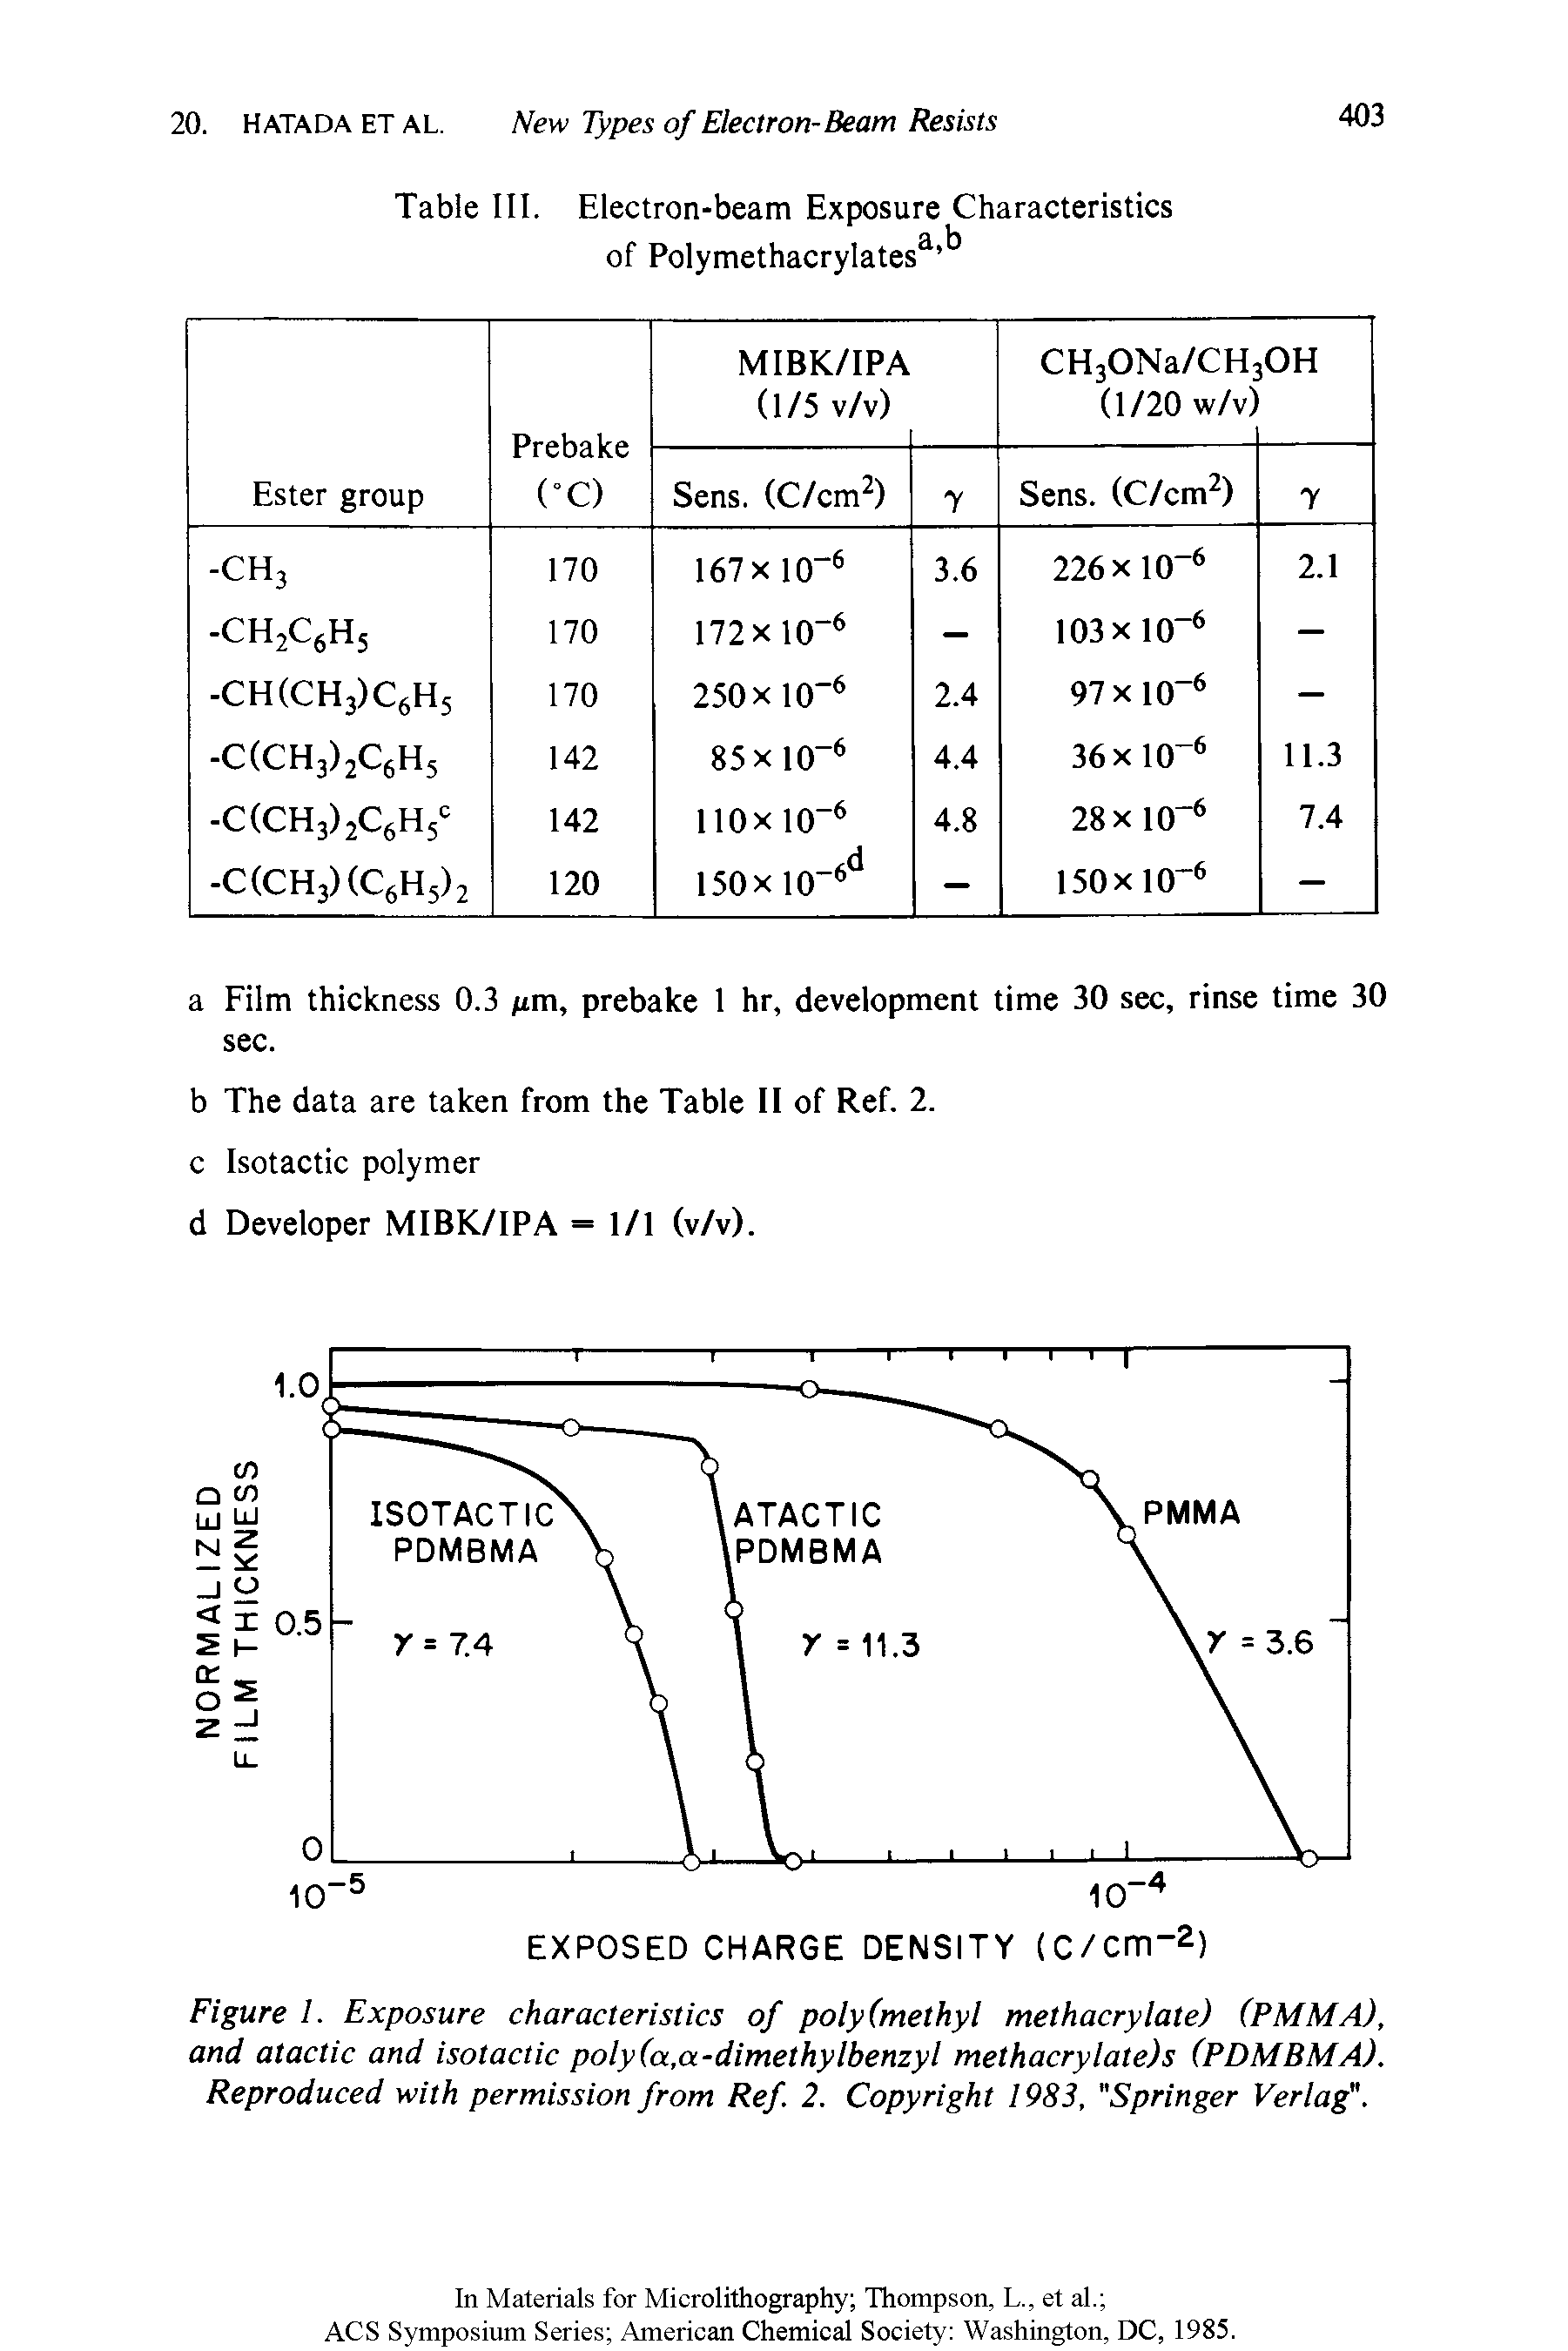 Figure 1. Exposure characteristics of poly (methyl methacrylate) (PMMA), and atactic and isotactic poly(a,<x-dimethylbenzyl methacrylate)s (PDMBMA). Reproduced with permission from Ref. 2. Copyright 1983, "Springer Verlag".